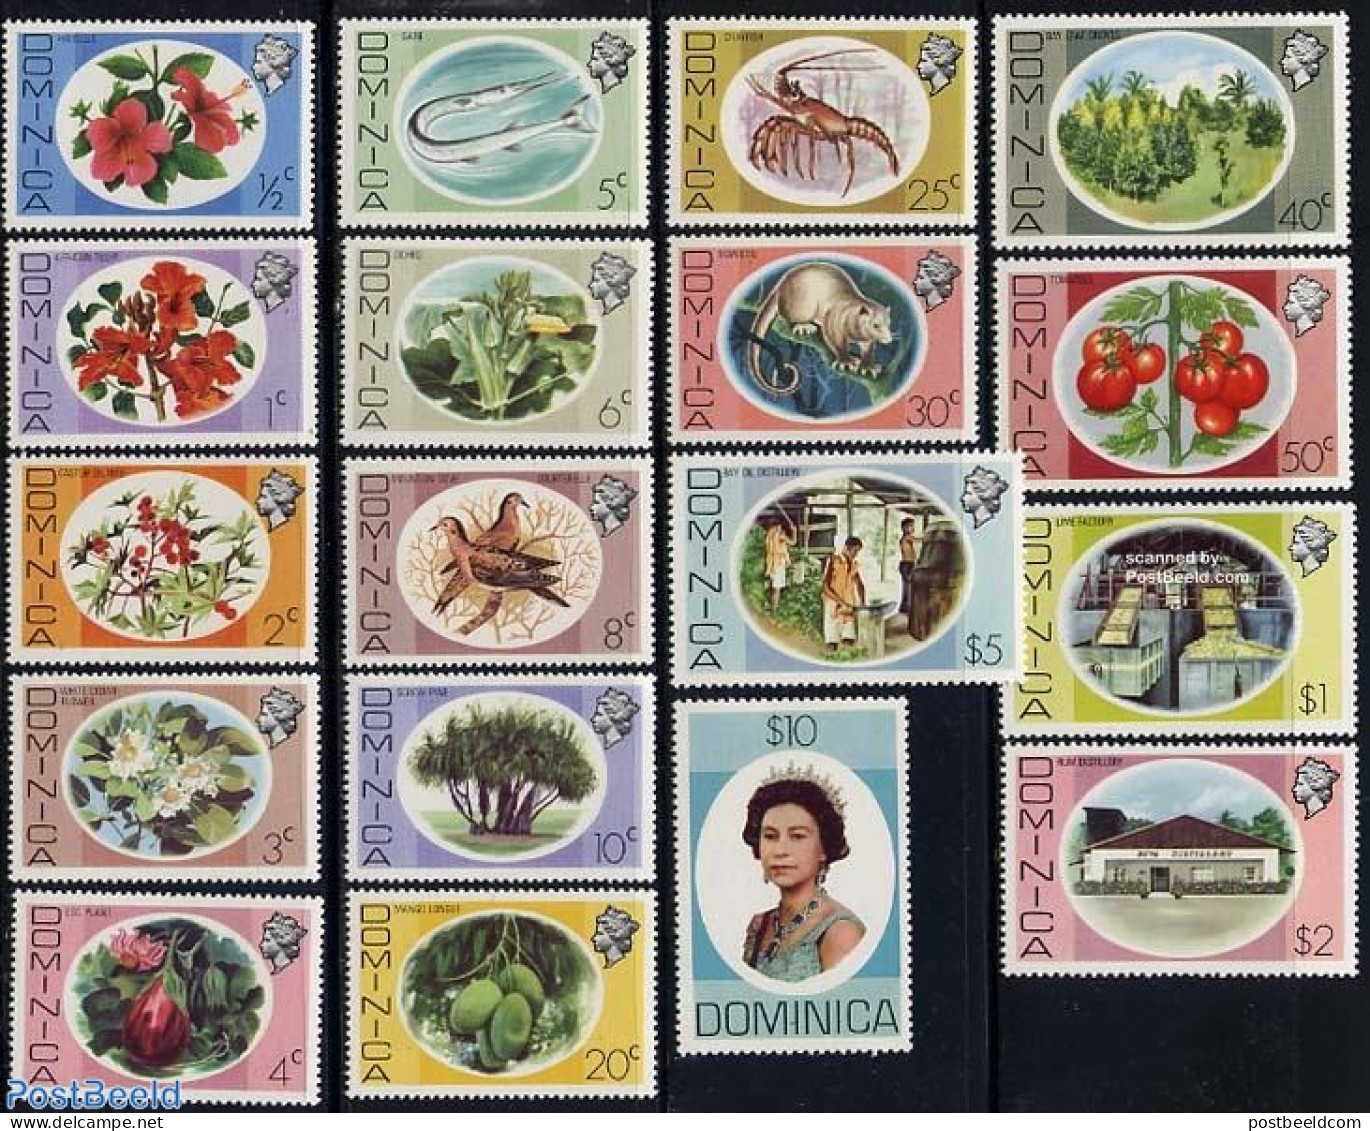 Dominica 1975 Definitives 18v, Mint NH, Nature - Flowers & Plants - Dominican Republic